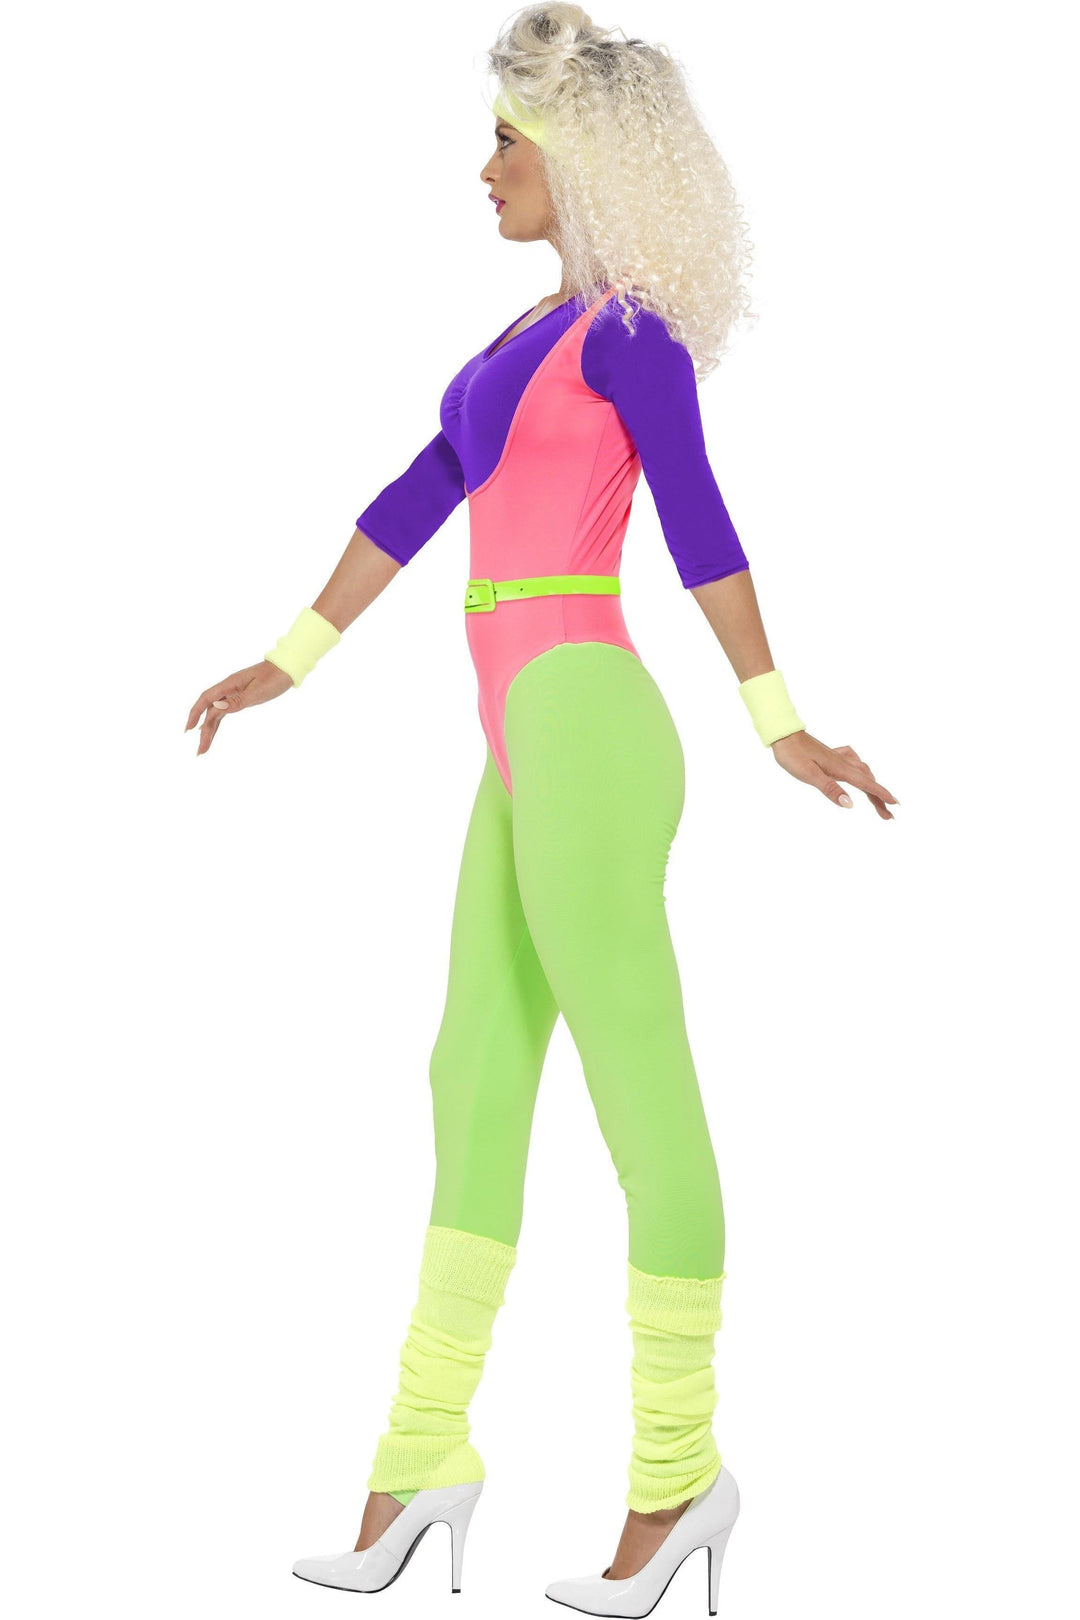 80s Work Out Costume with Jumpsuit